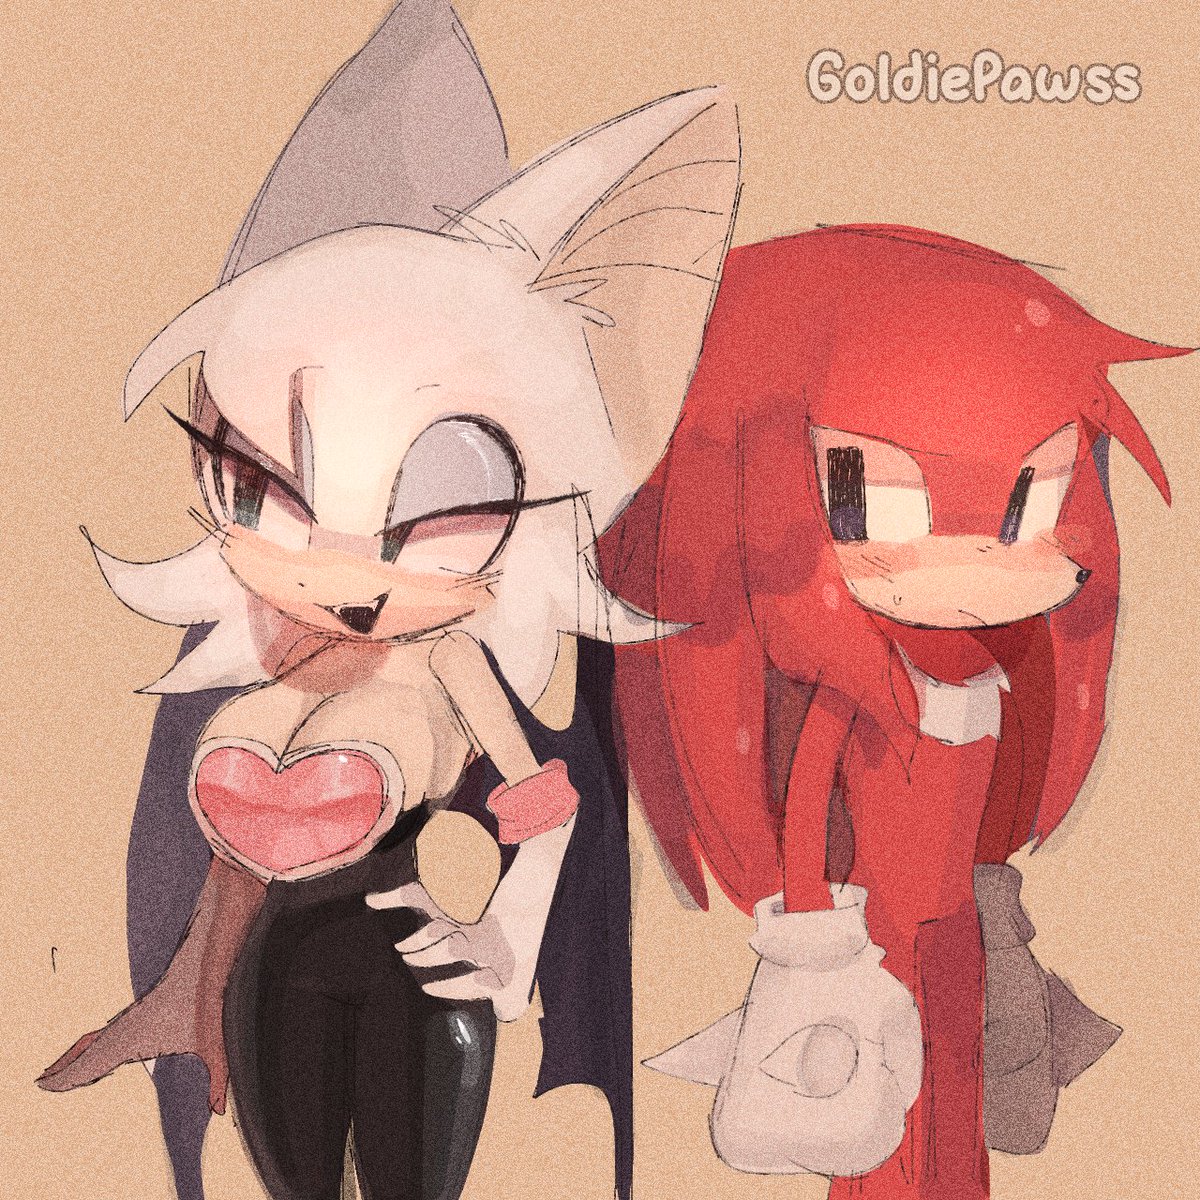 He stares when she isn't looking hehe
(Simple art bc i have art block)
.
.
#Knuxouge #Knuckles #KnucklestheEchidna #Rouge #RougetheBat #Sonic #SonictheHedgehog #Art